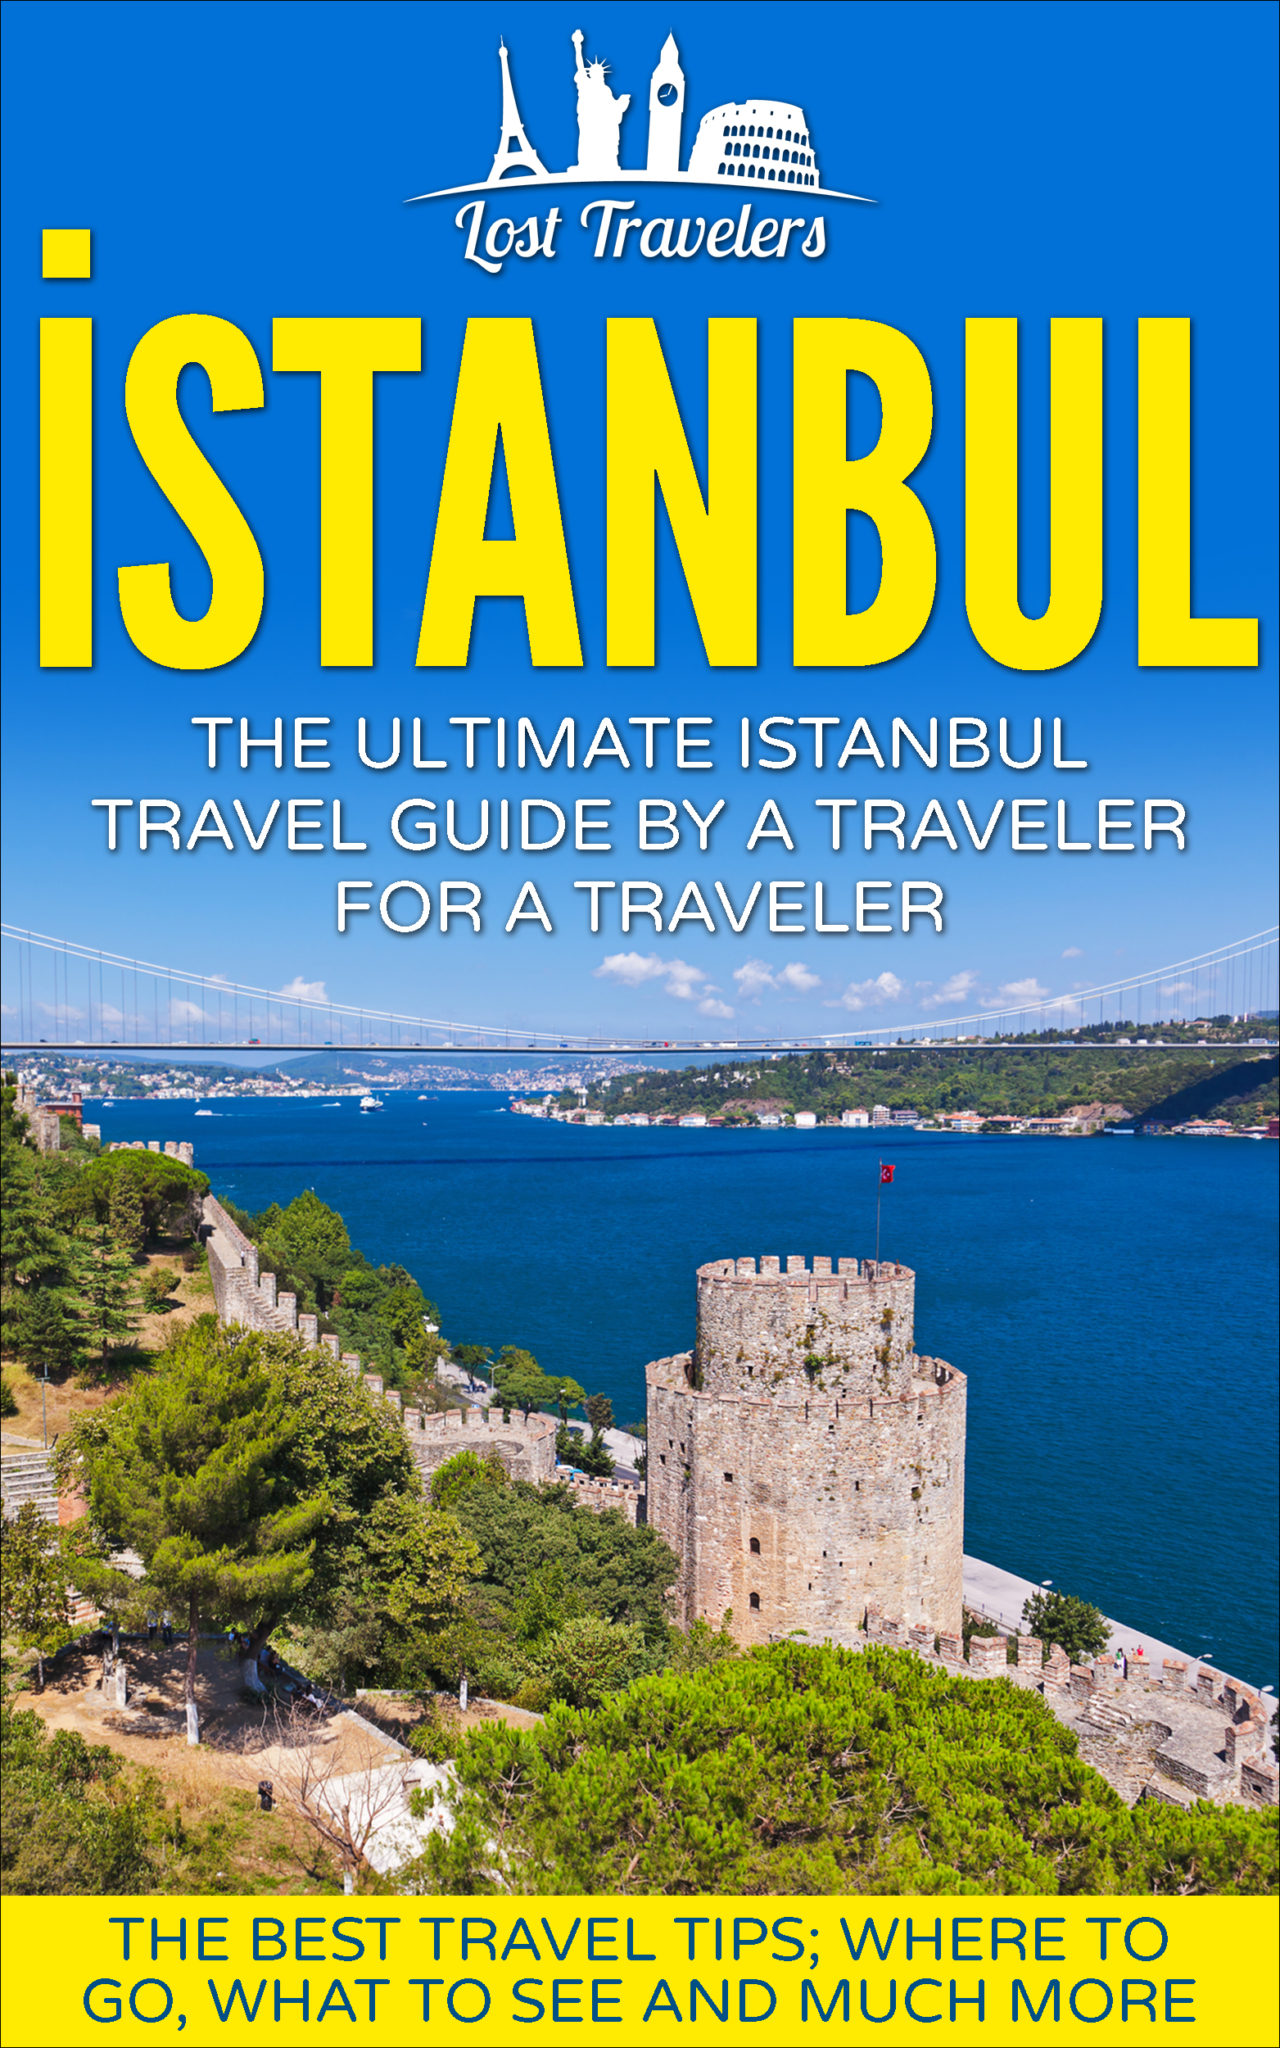 FREE: Istanbul: The Ultimate Istanbul Travel Guide By A Traveler For A Traveler by Lost Travelers by Lost Travelers